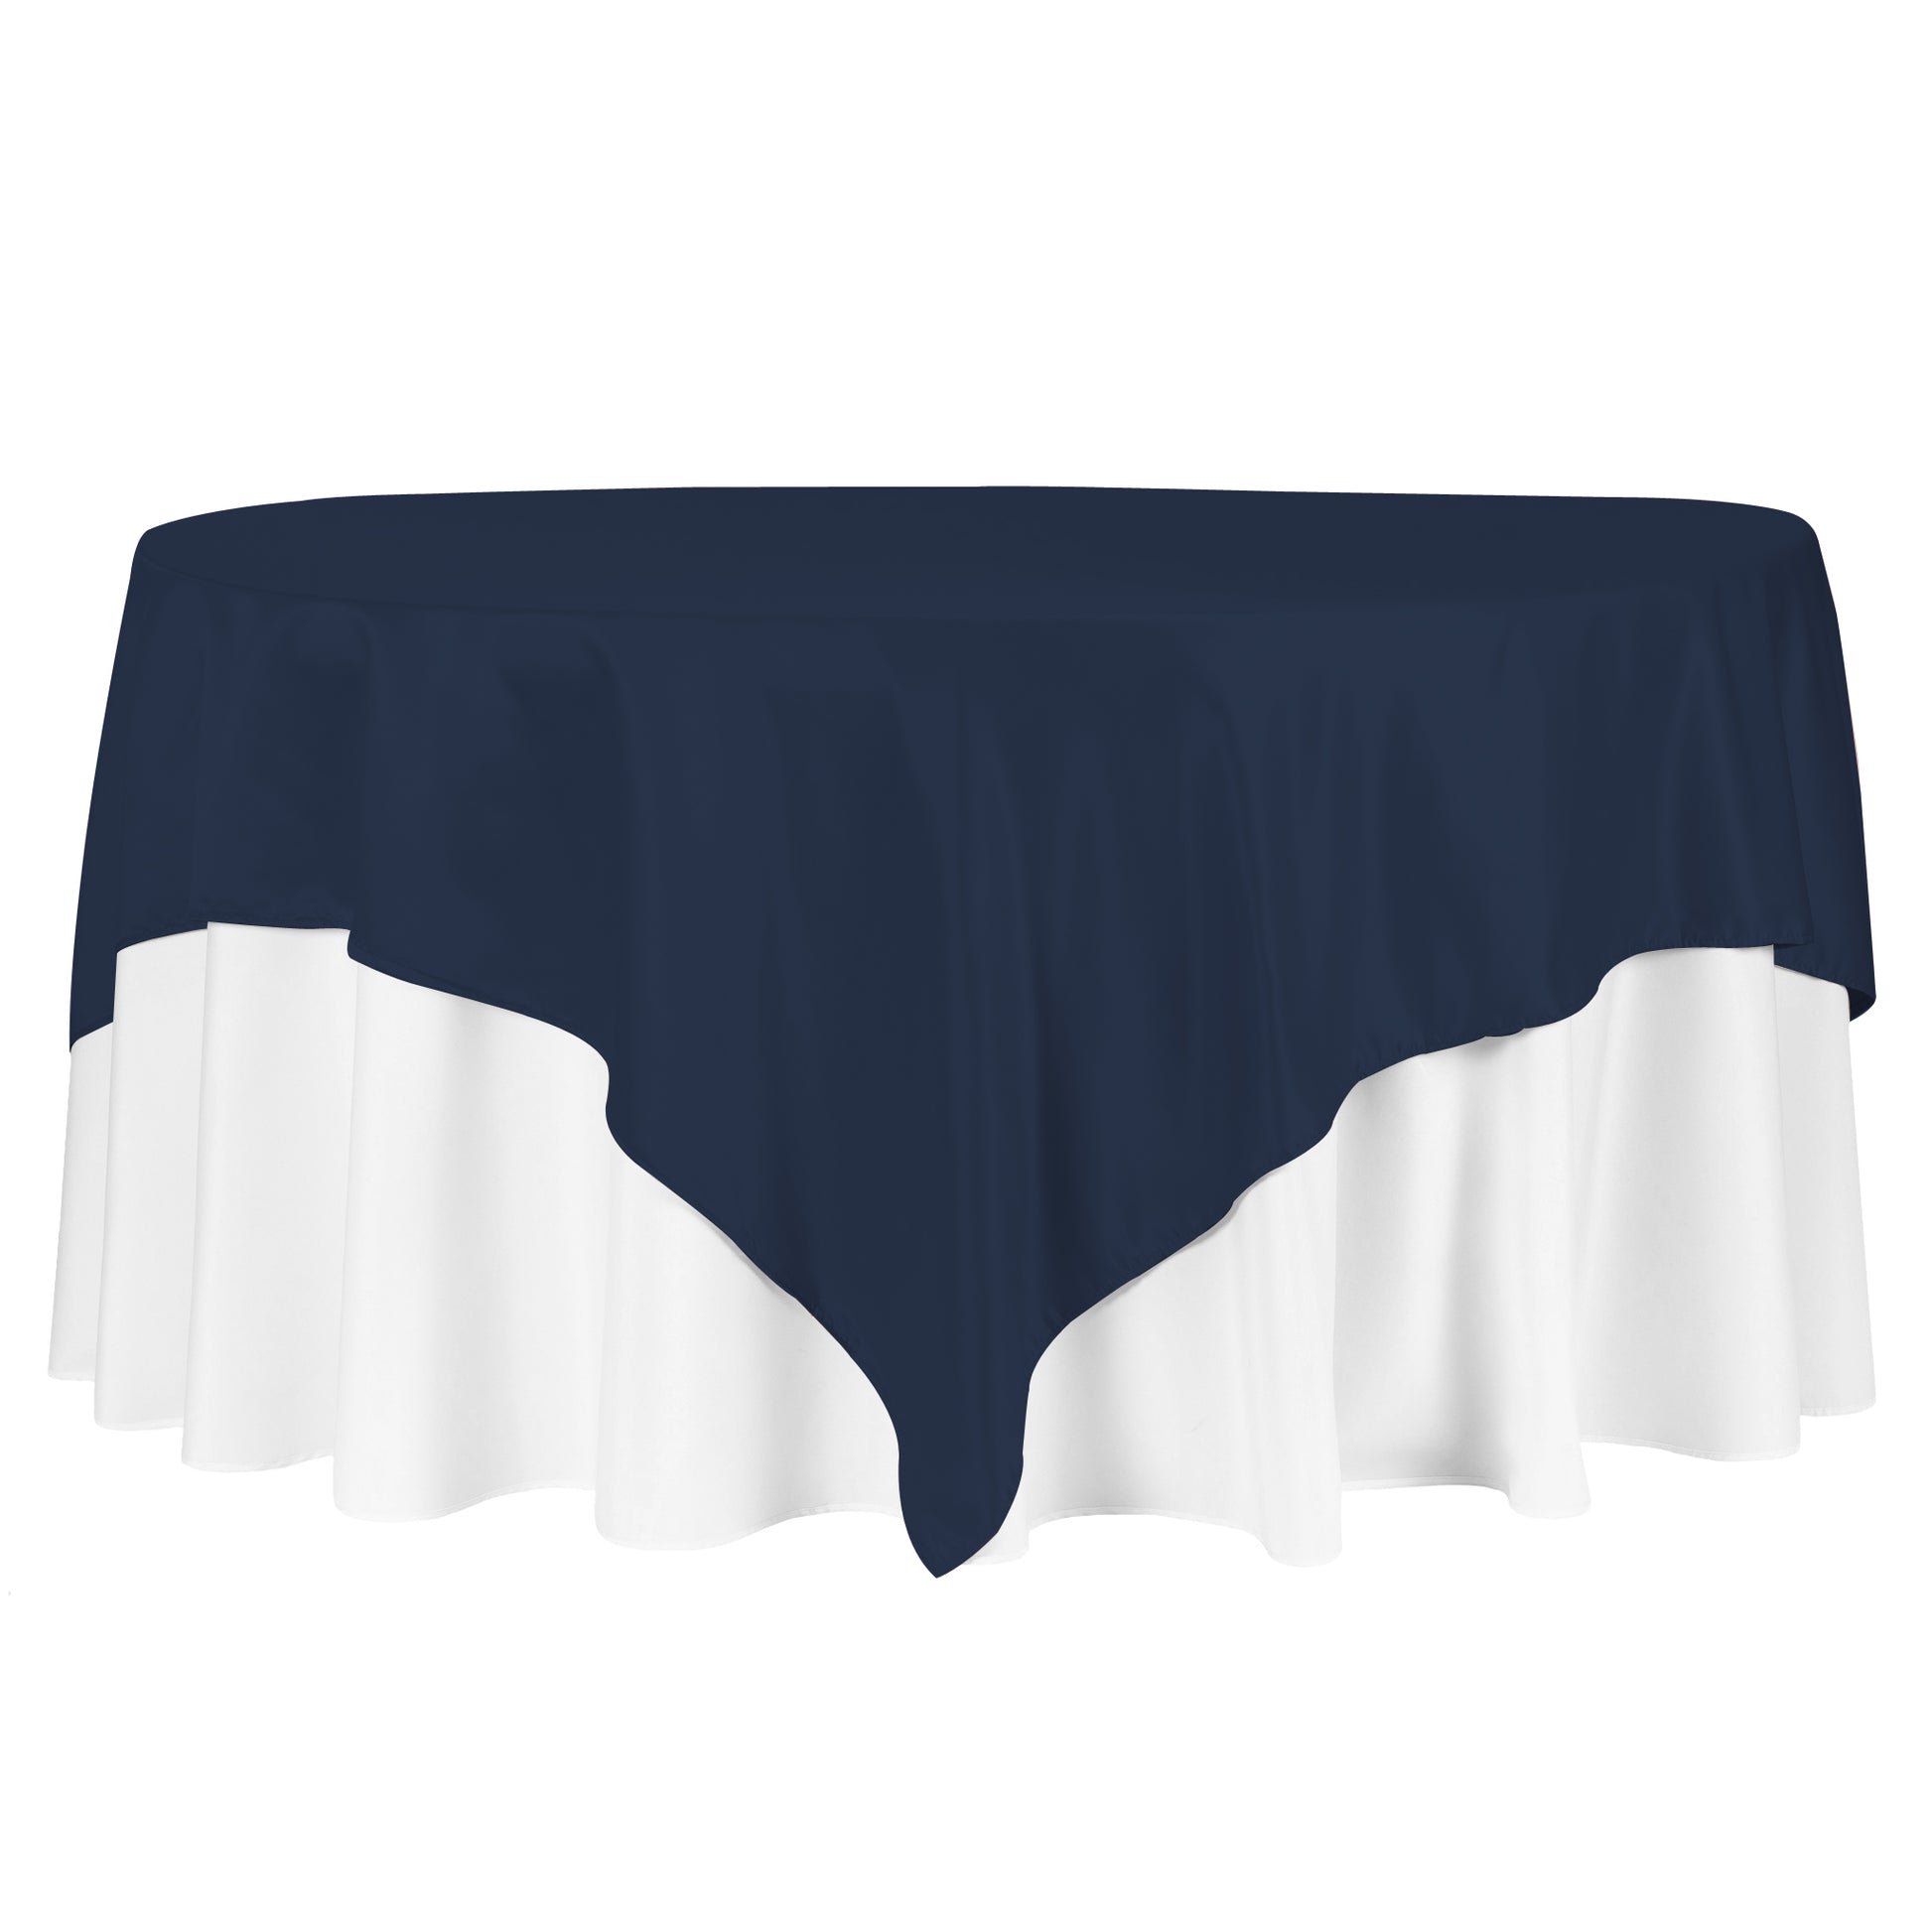 Square 90"x90" Lamour Satin Table Overlay - Navy Blue